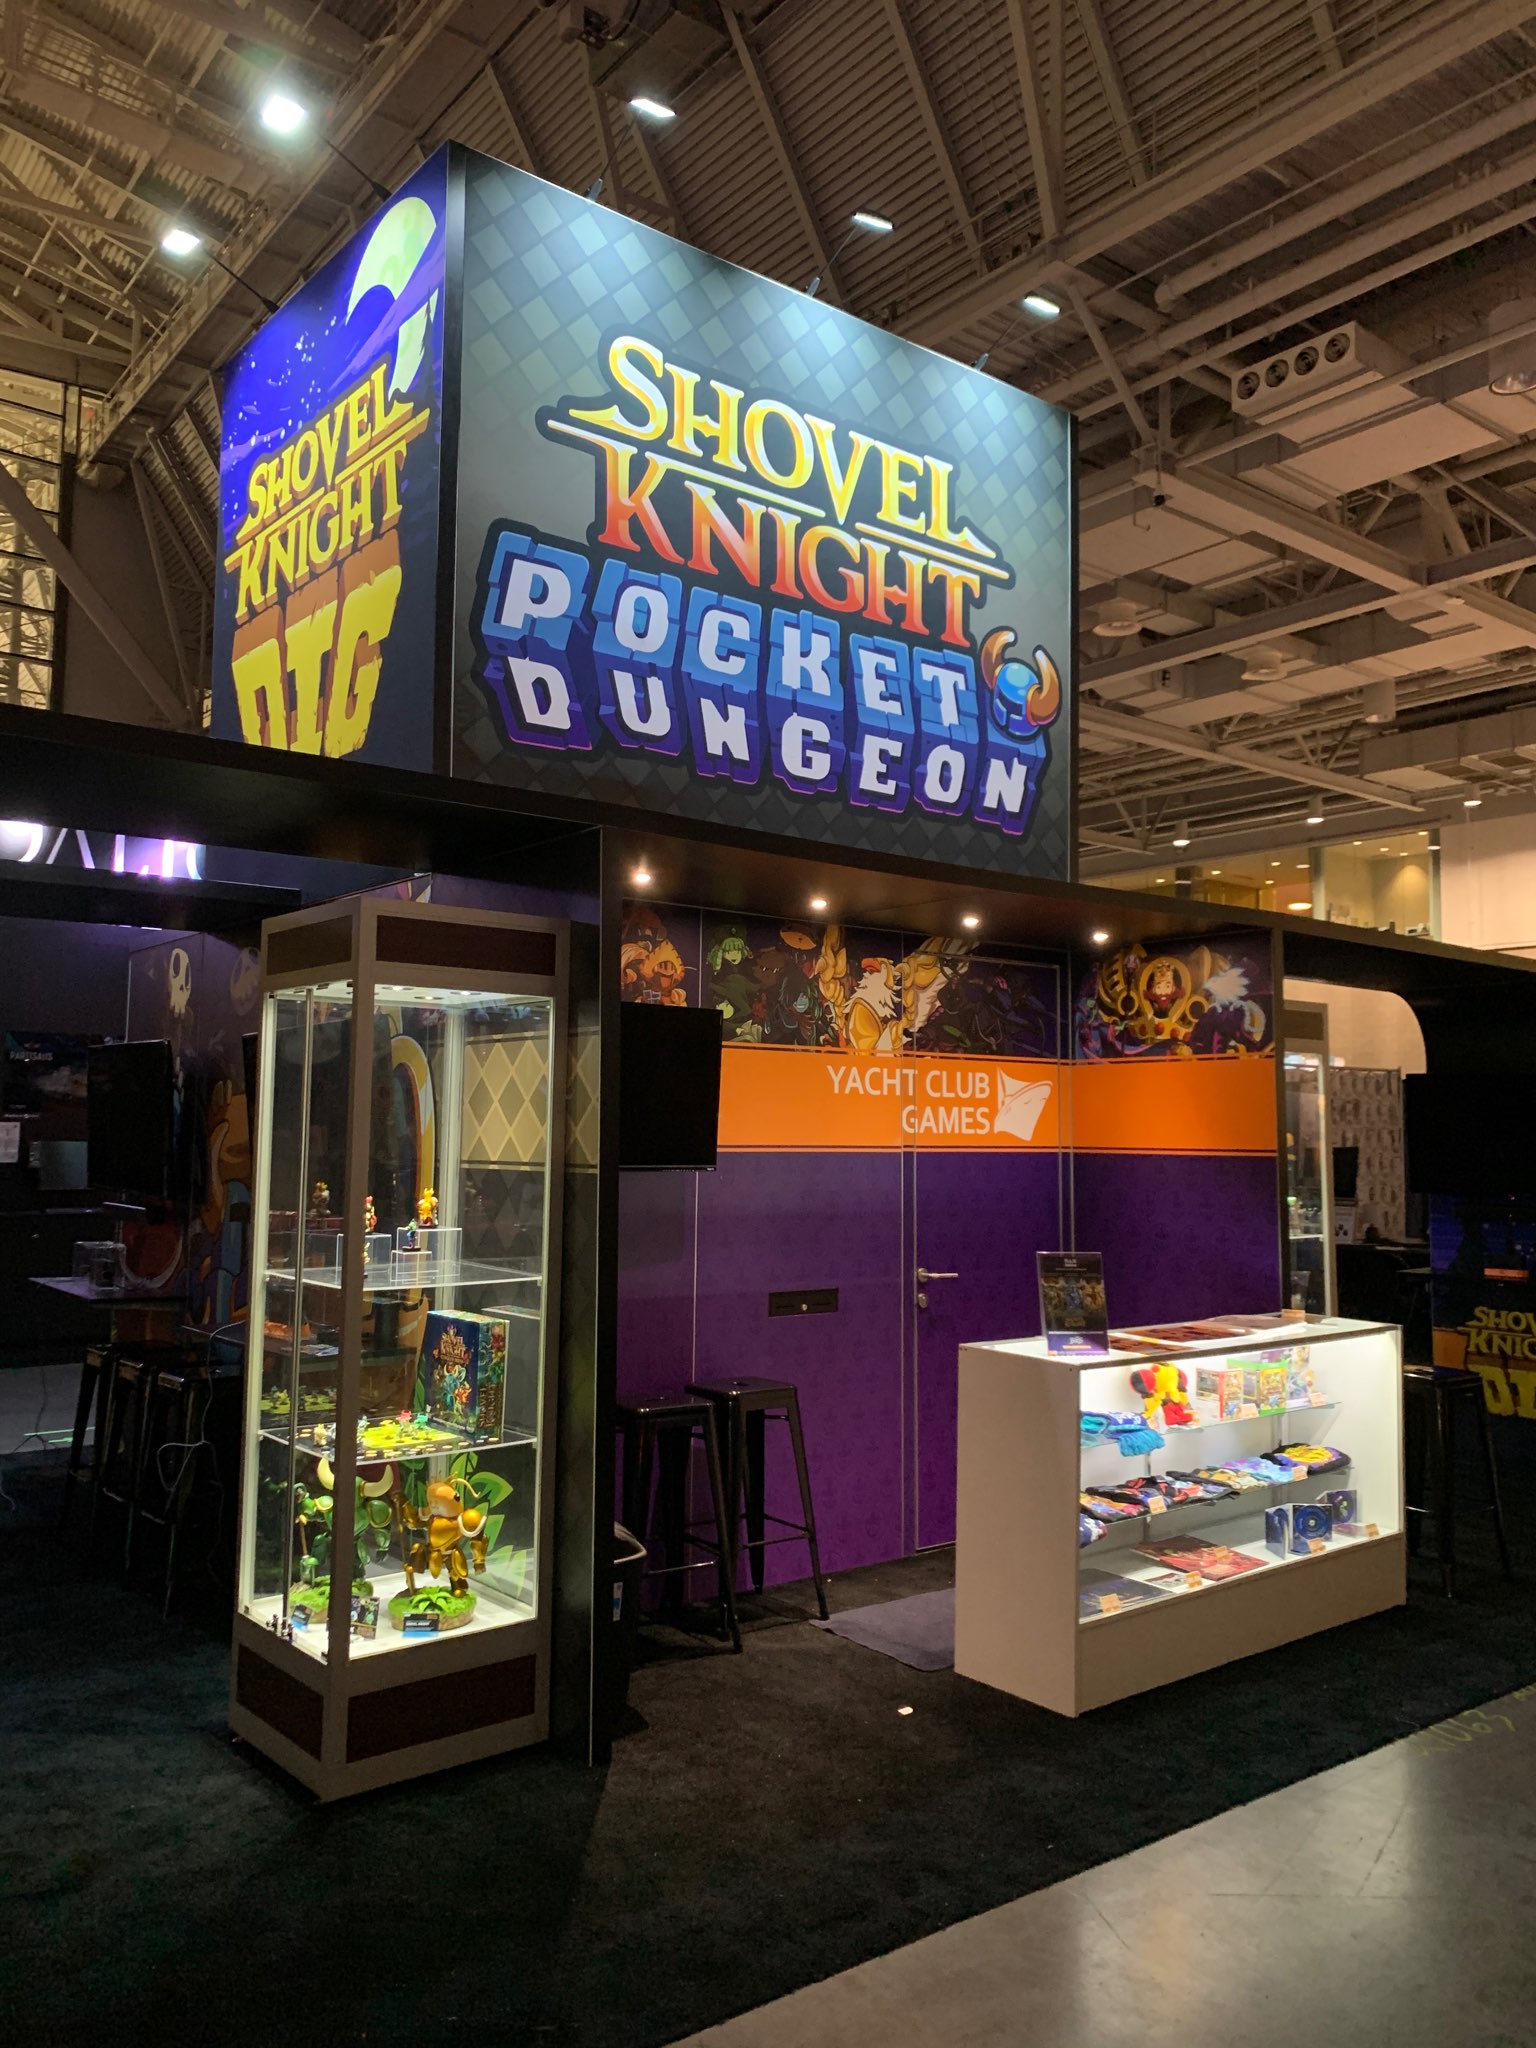 First 4 Figures Shovel Knight in Yacht Club Games' booth @ PAX East 2020